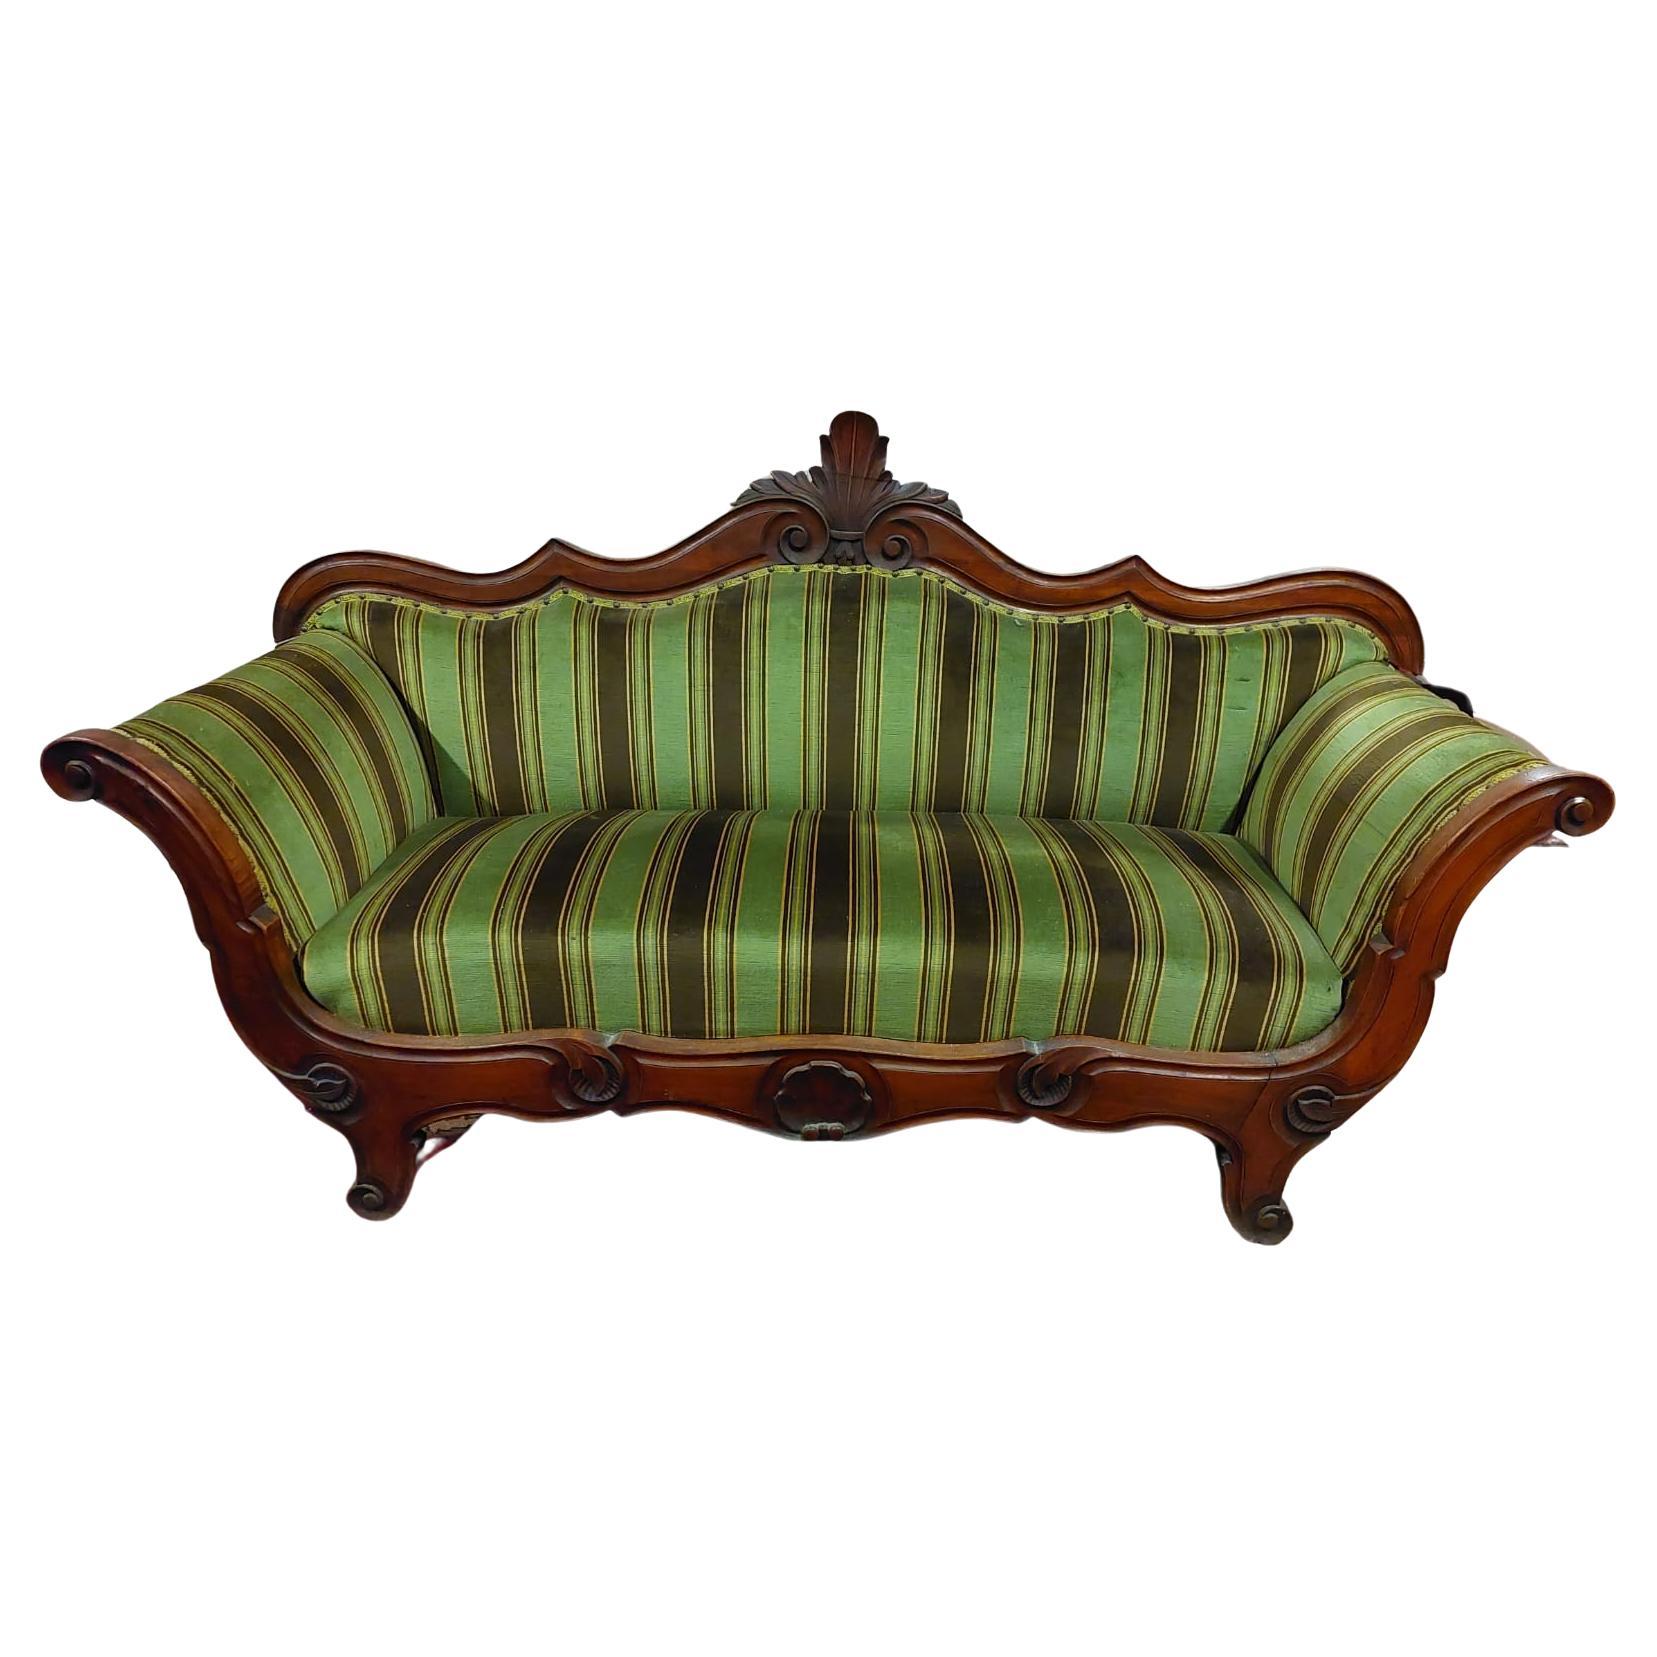 Antique Louis Philippe Sofa in Inlay Walnut and Green Fabric, 19th Century Italy For Sale